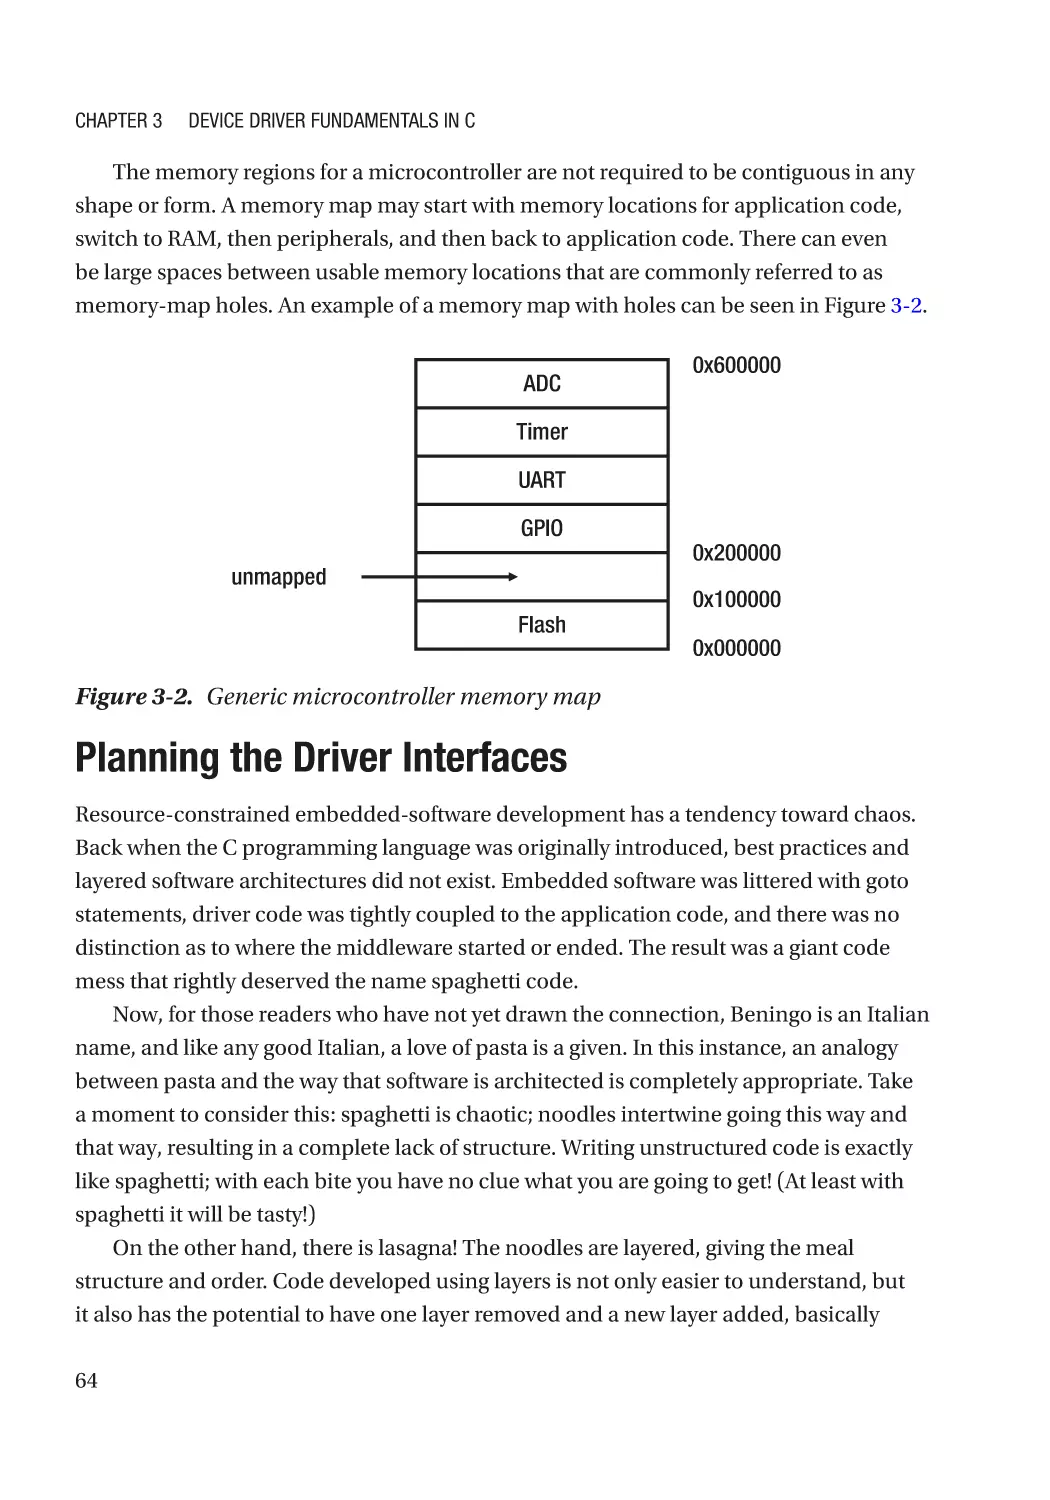 Planning the Driver Interfaces